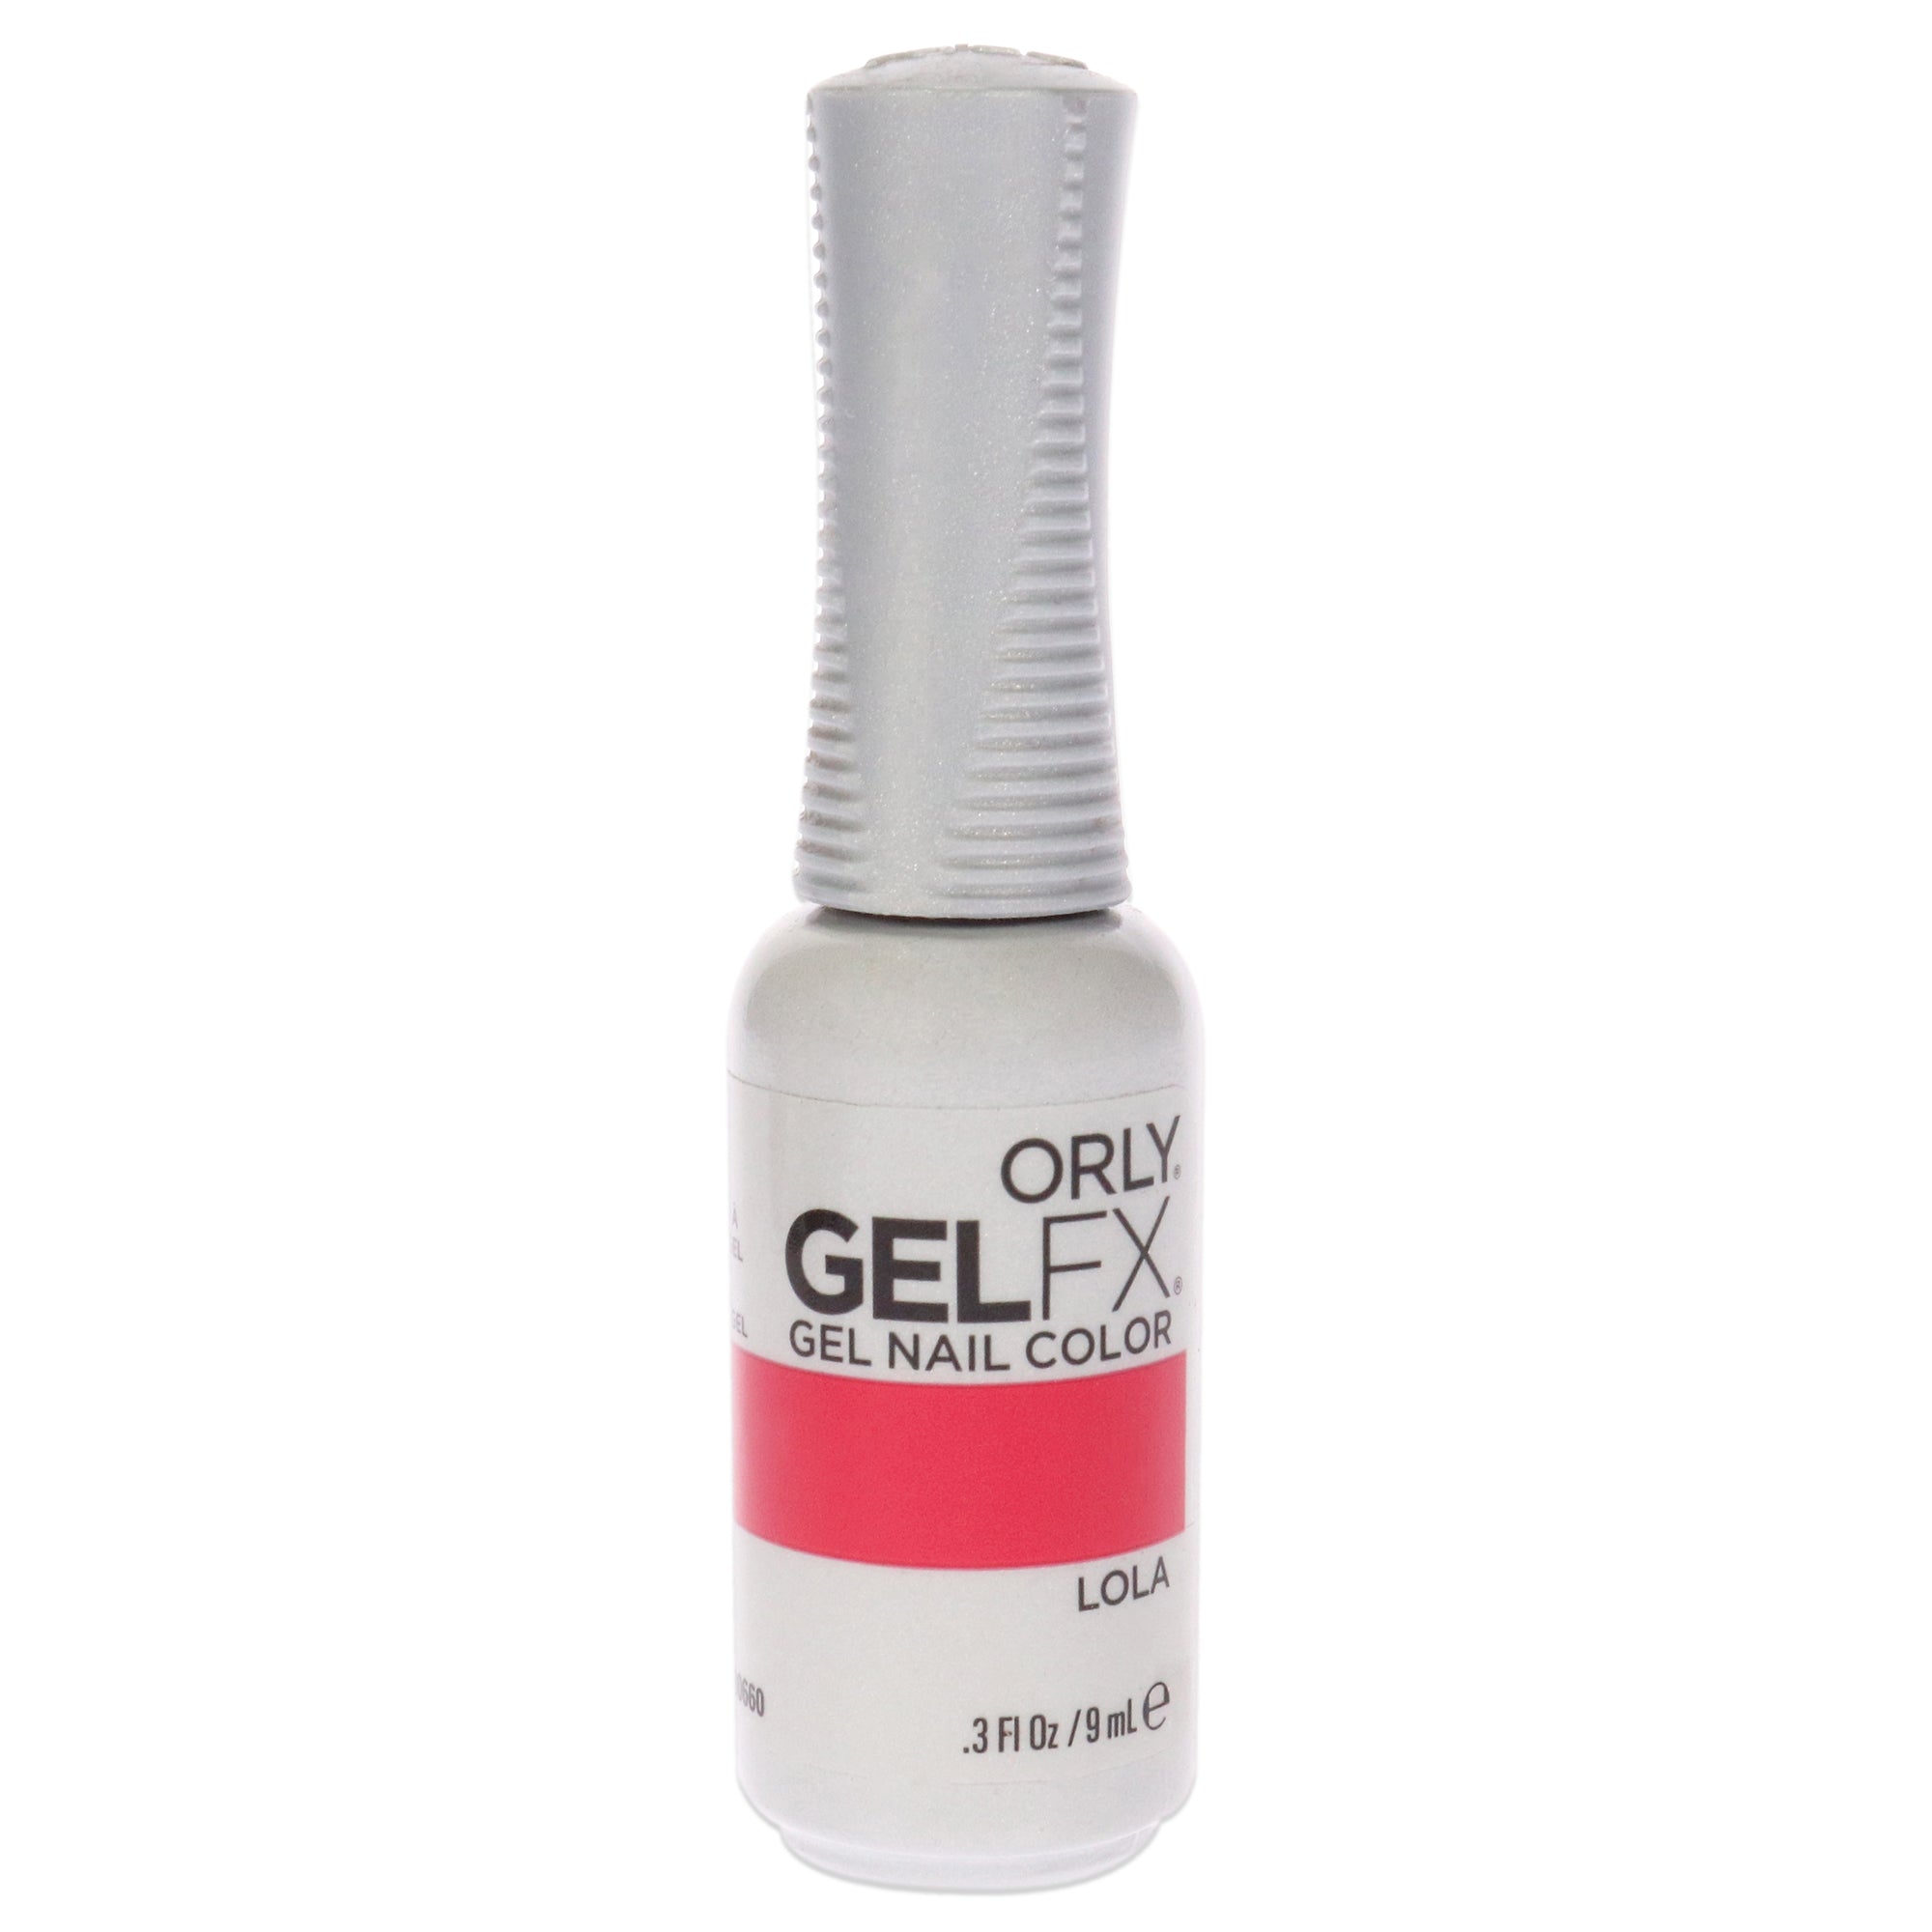 Gel Fx Gel Nail Color - 30660 Lola by Orly for Women - 0.3 oz Nail Polish